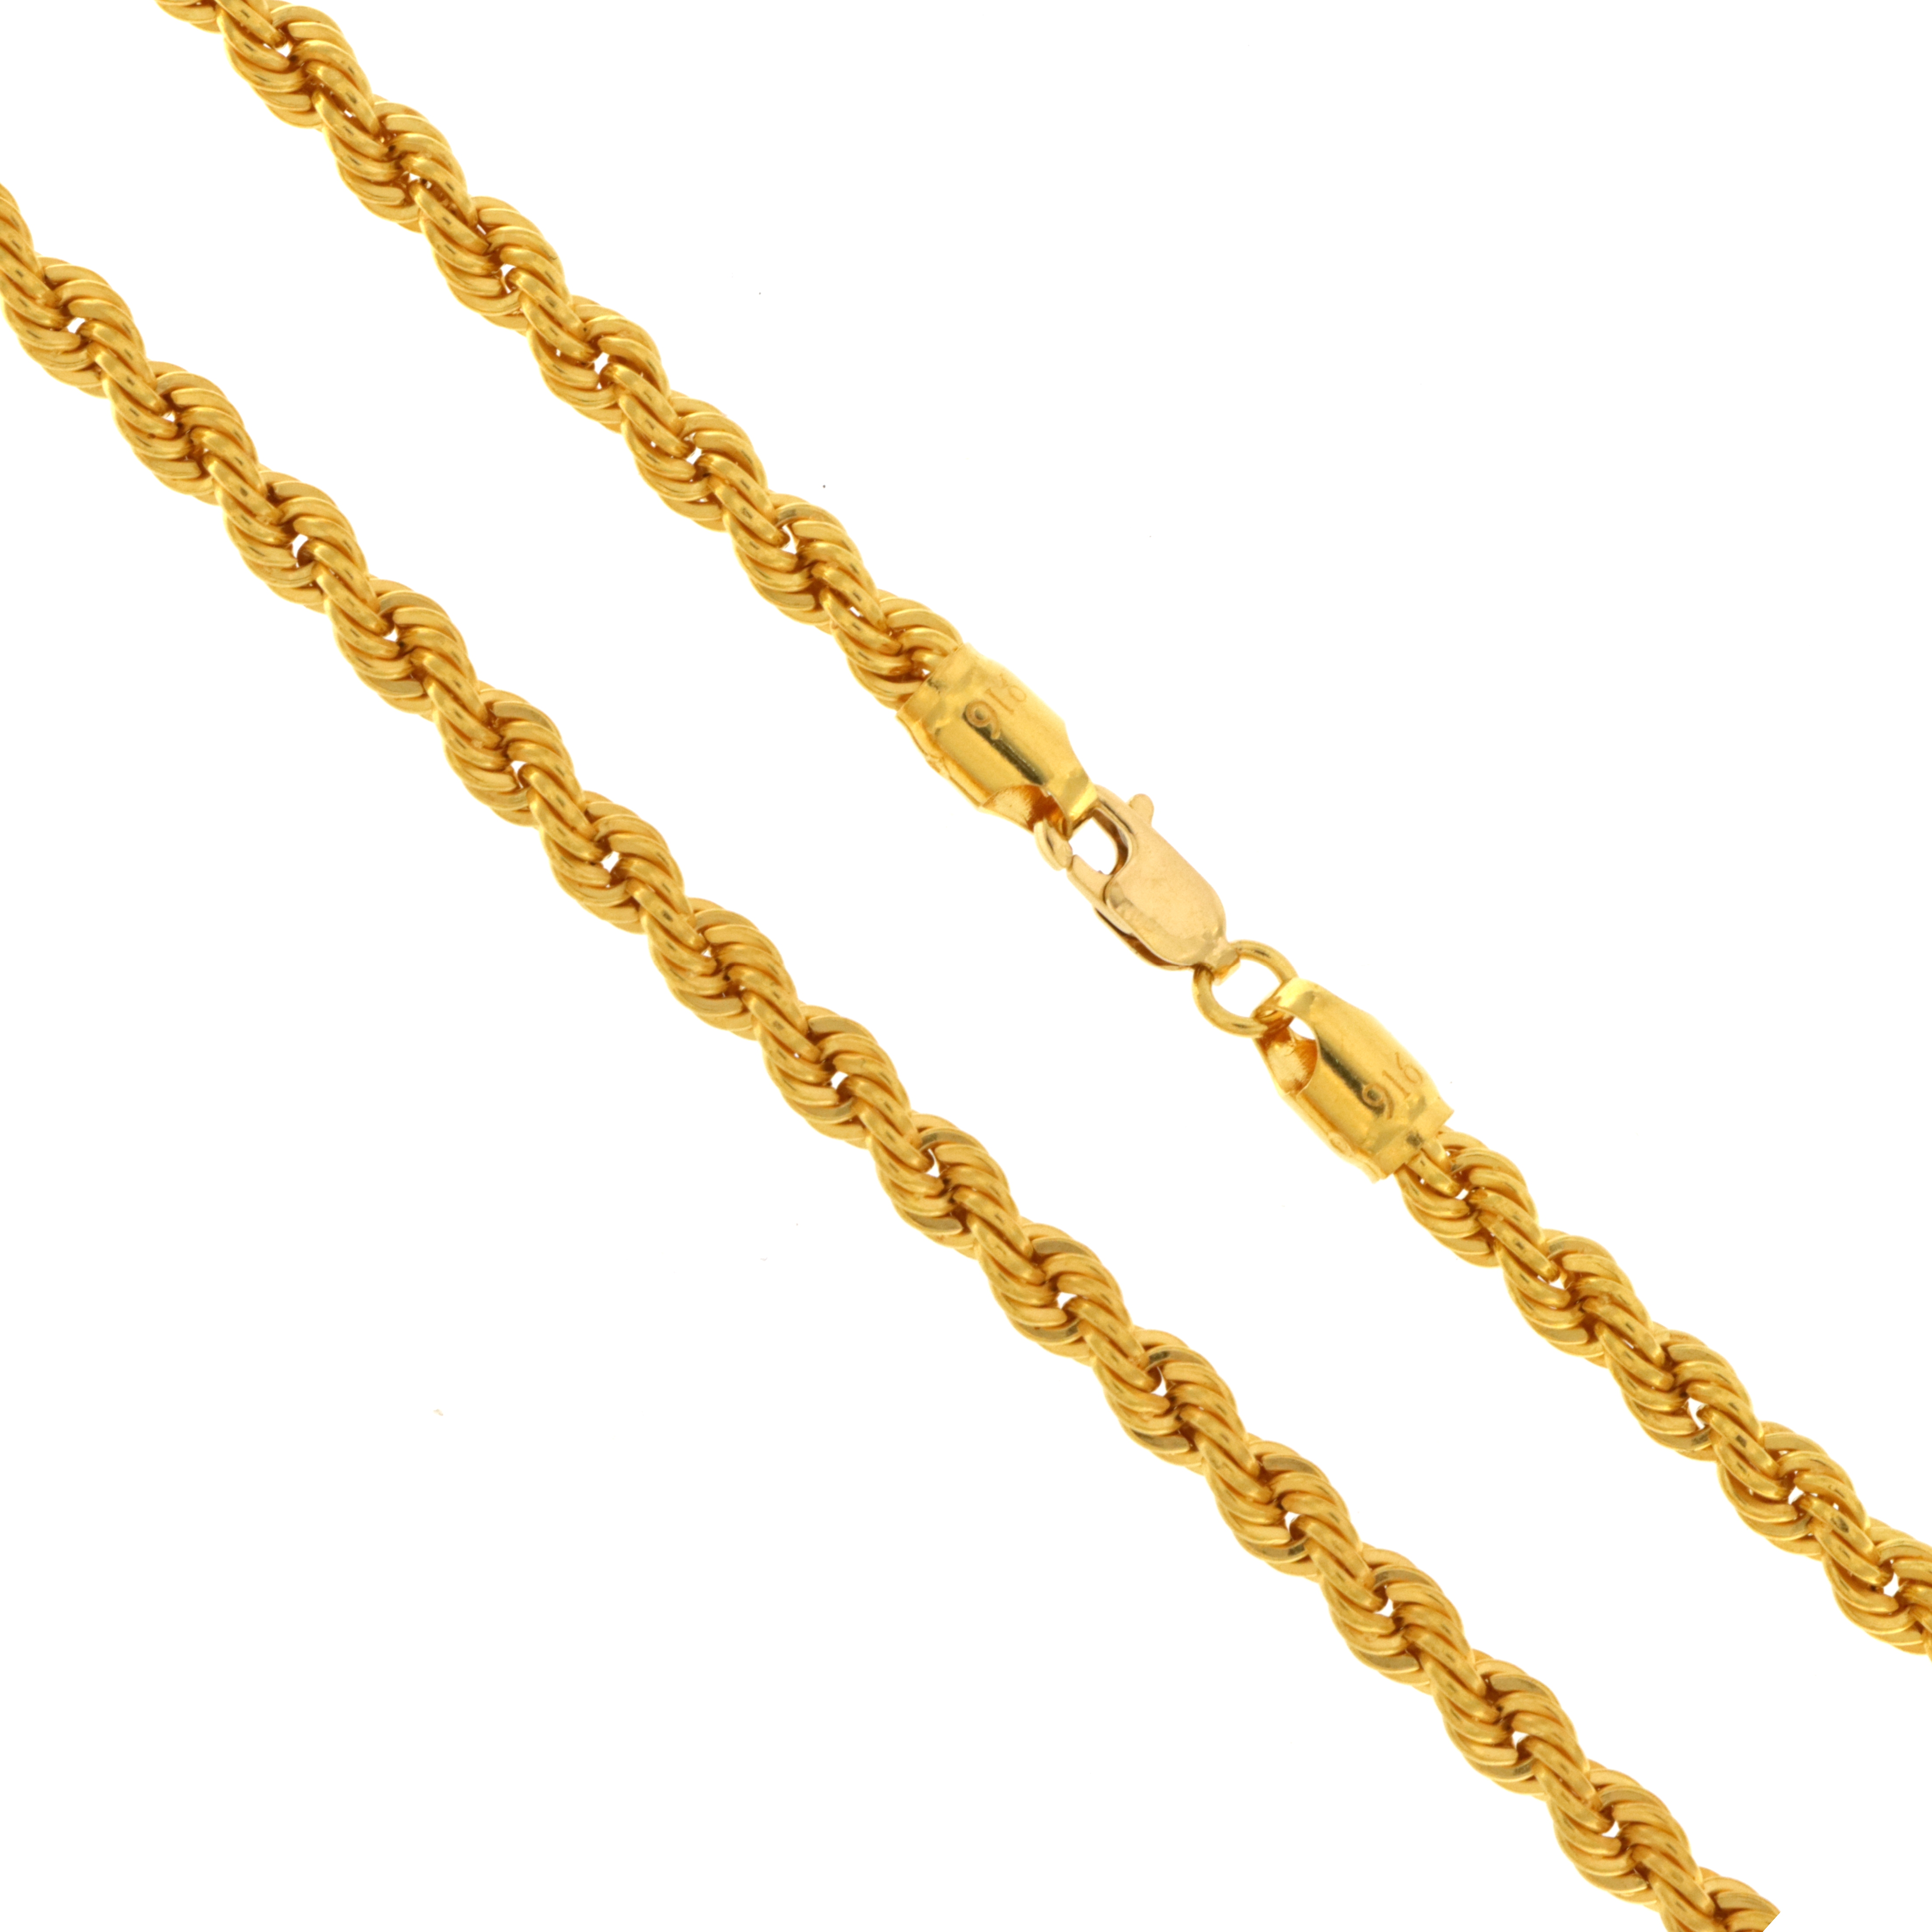 22ct Gold Hollow Rope Chain